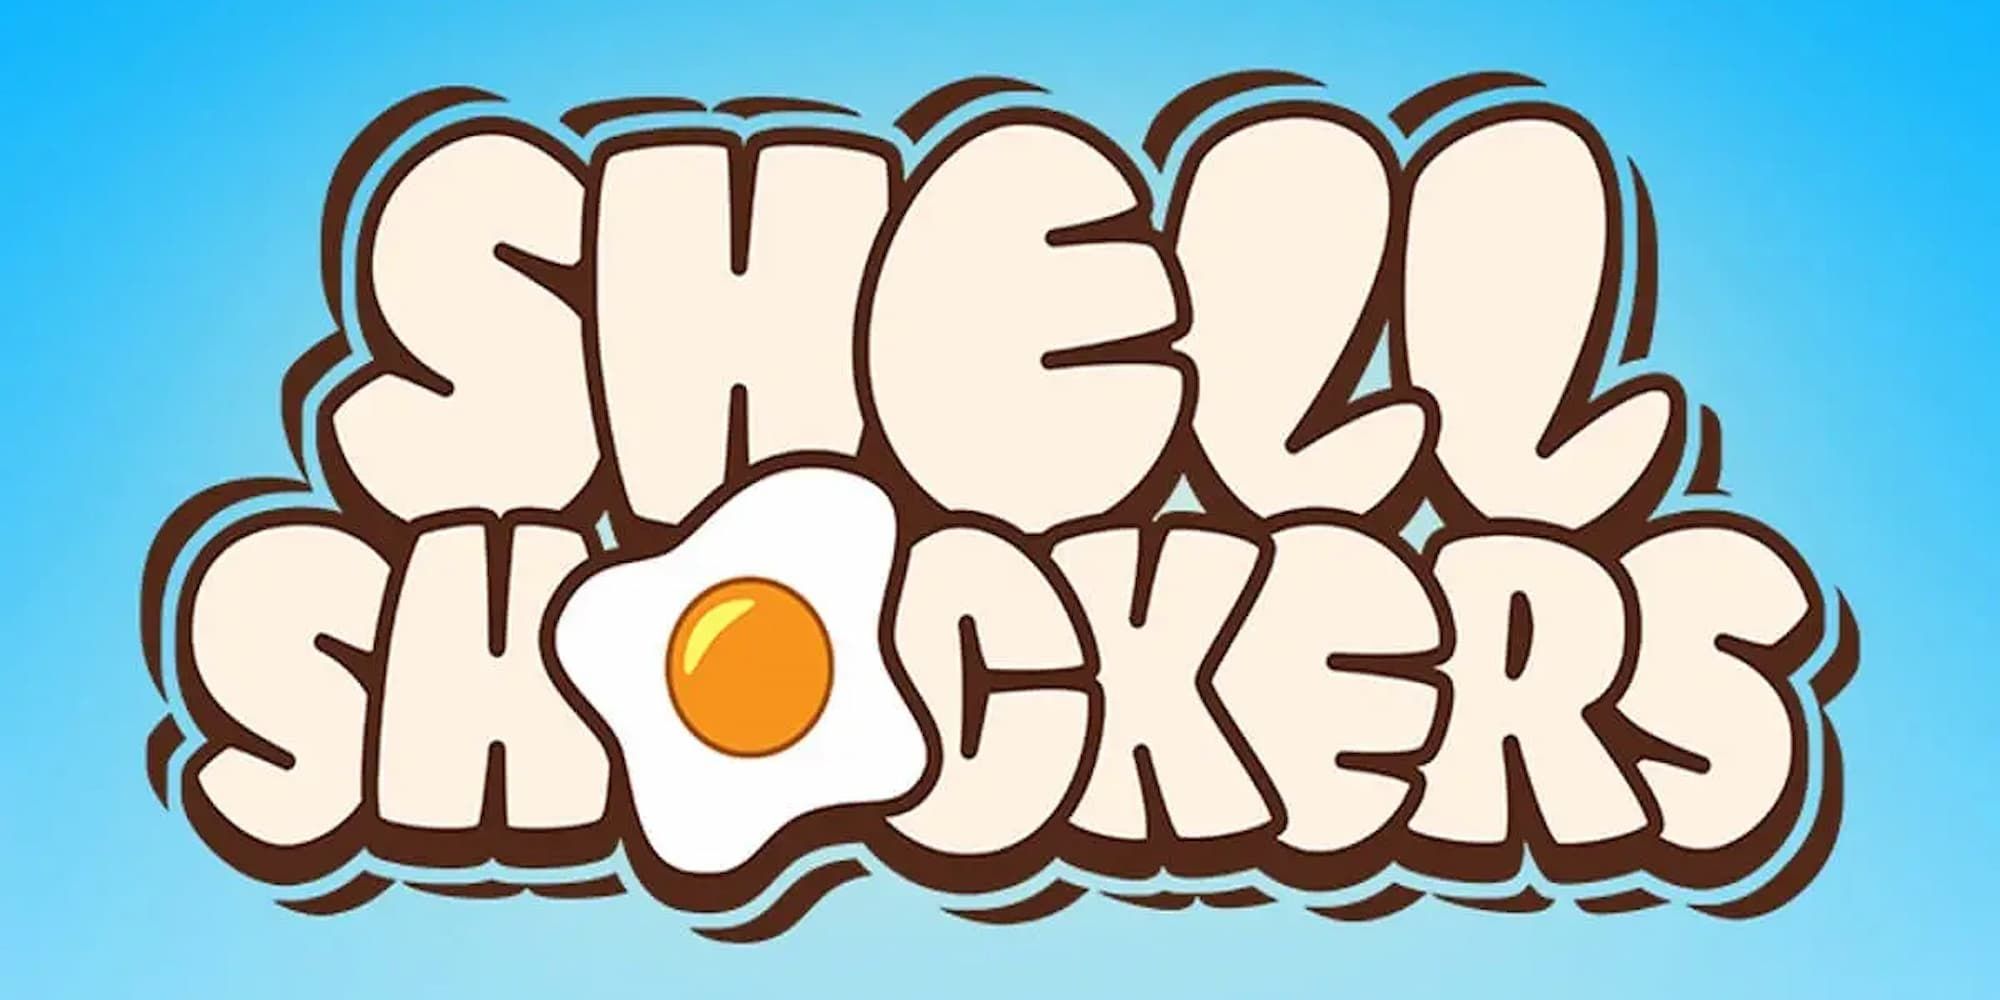 The Shell Shockers logo has the 'O' replaced with a cracked egg over a light blue background.